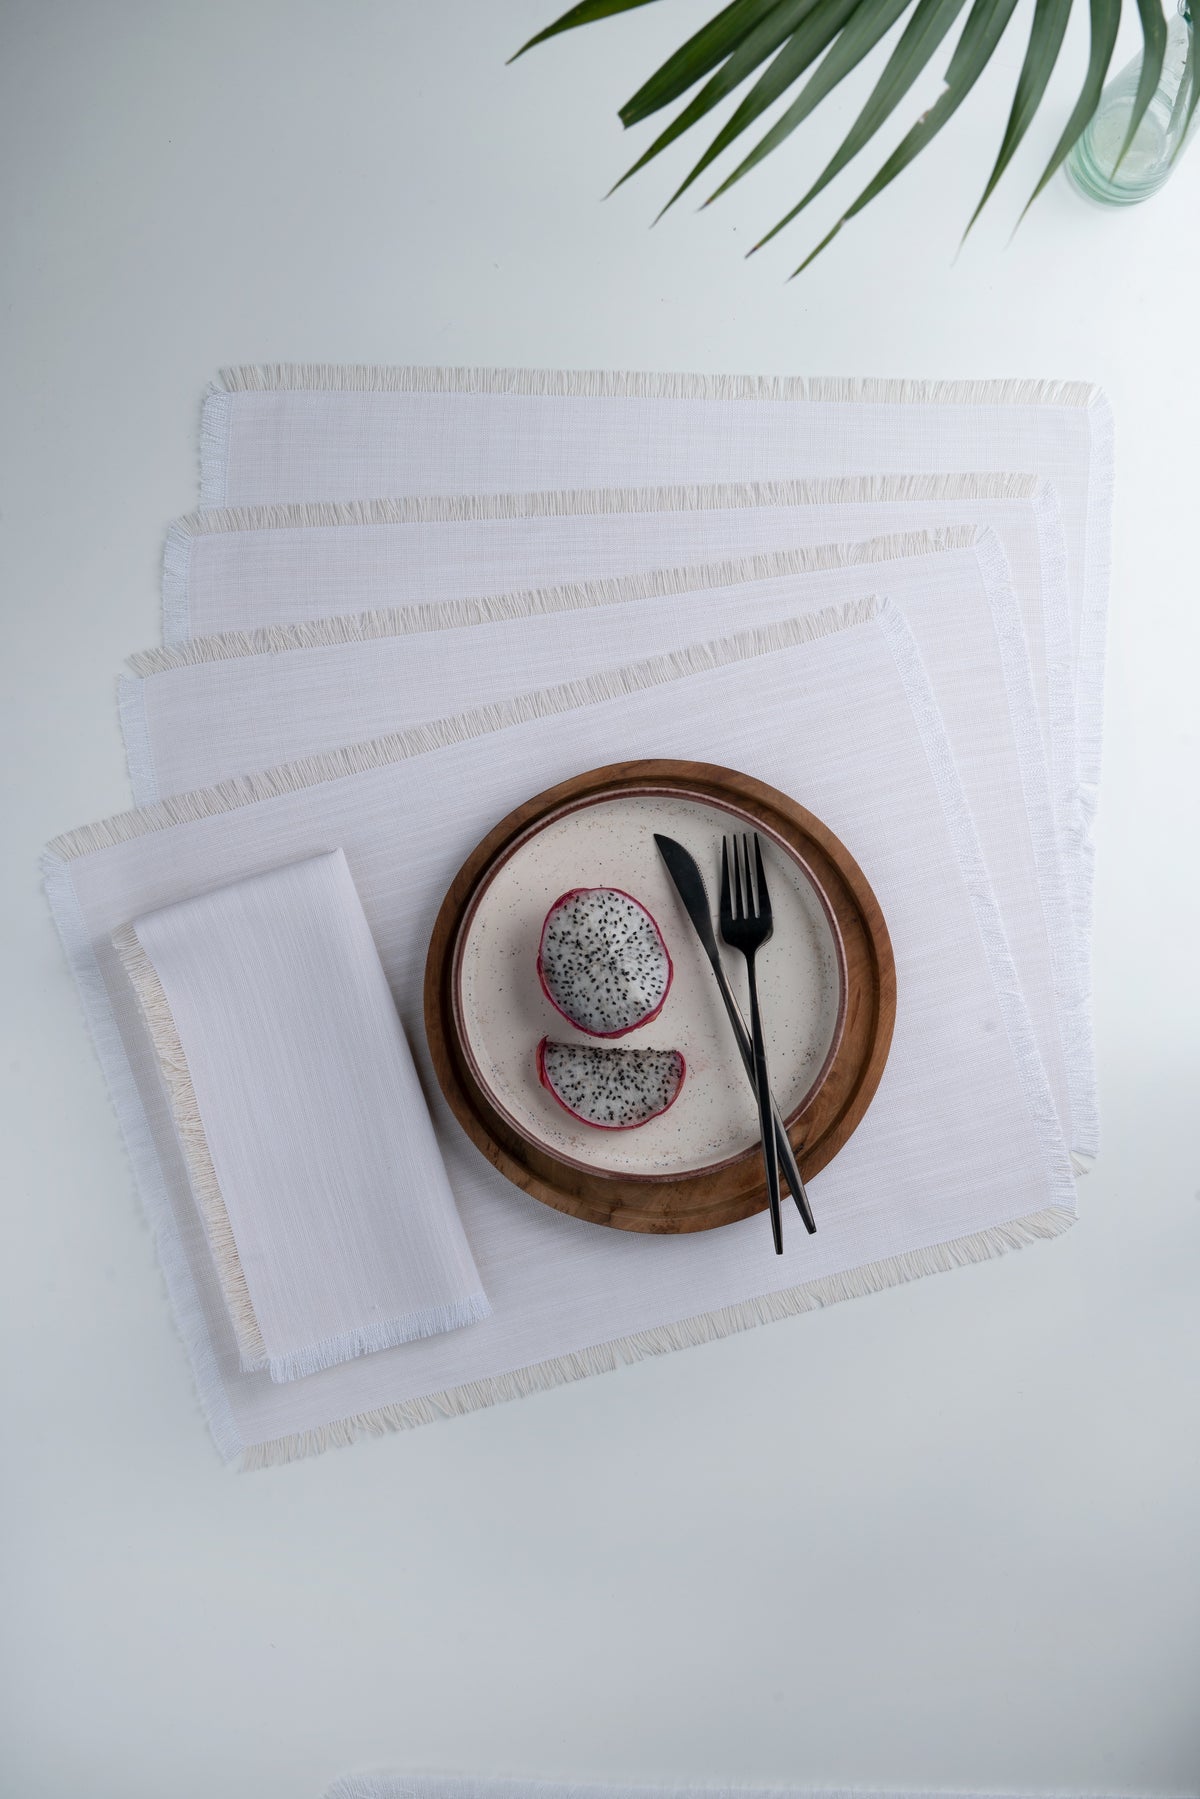 Chambray Cream and White Linen Textured Placemats 14 x 19 Inch Set of 4 - Fringe